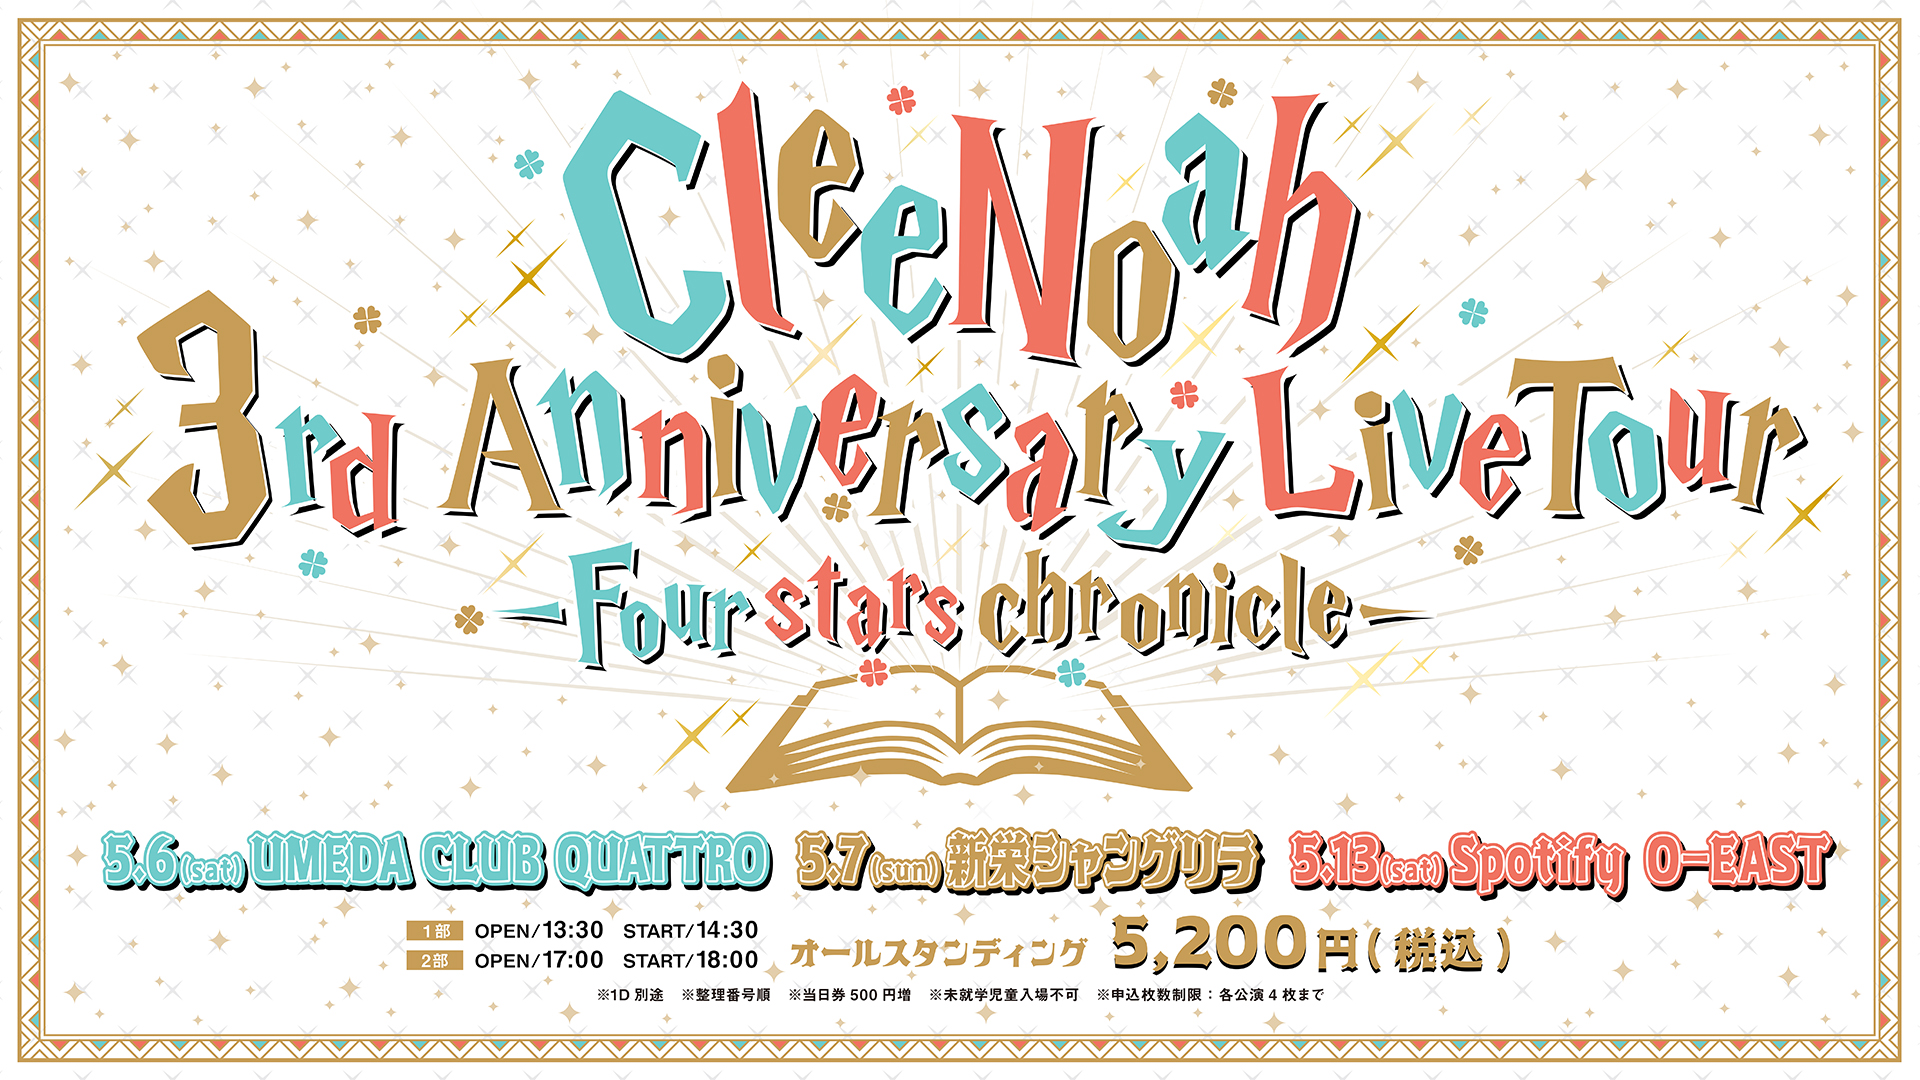 3rd Anniversary Live Tour -Four stars chronicle-